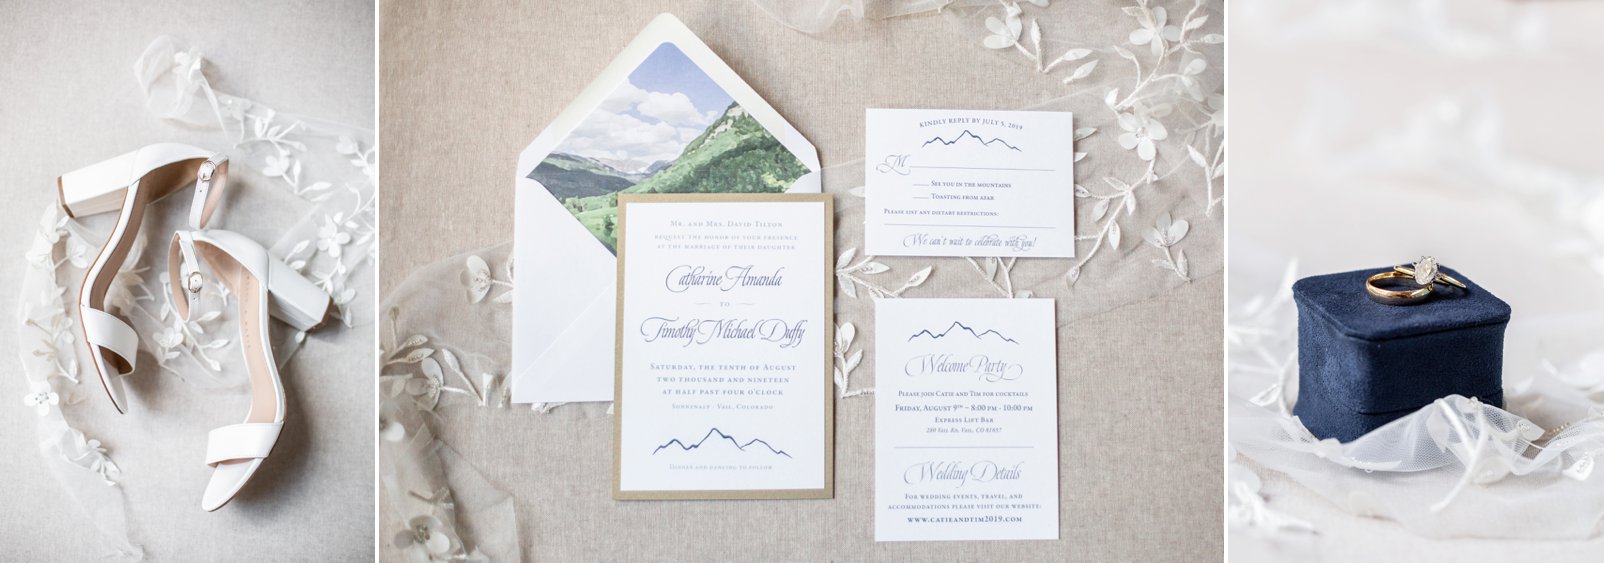 bride invitation suite and rings during sonnenalp wedding captured by colorado wedding photographer